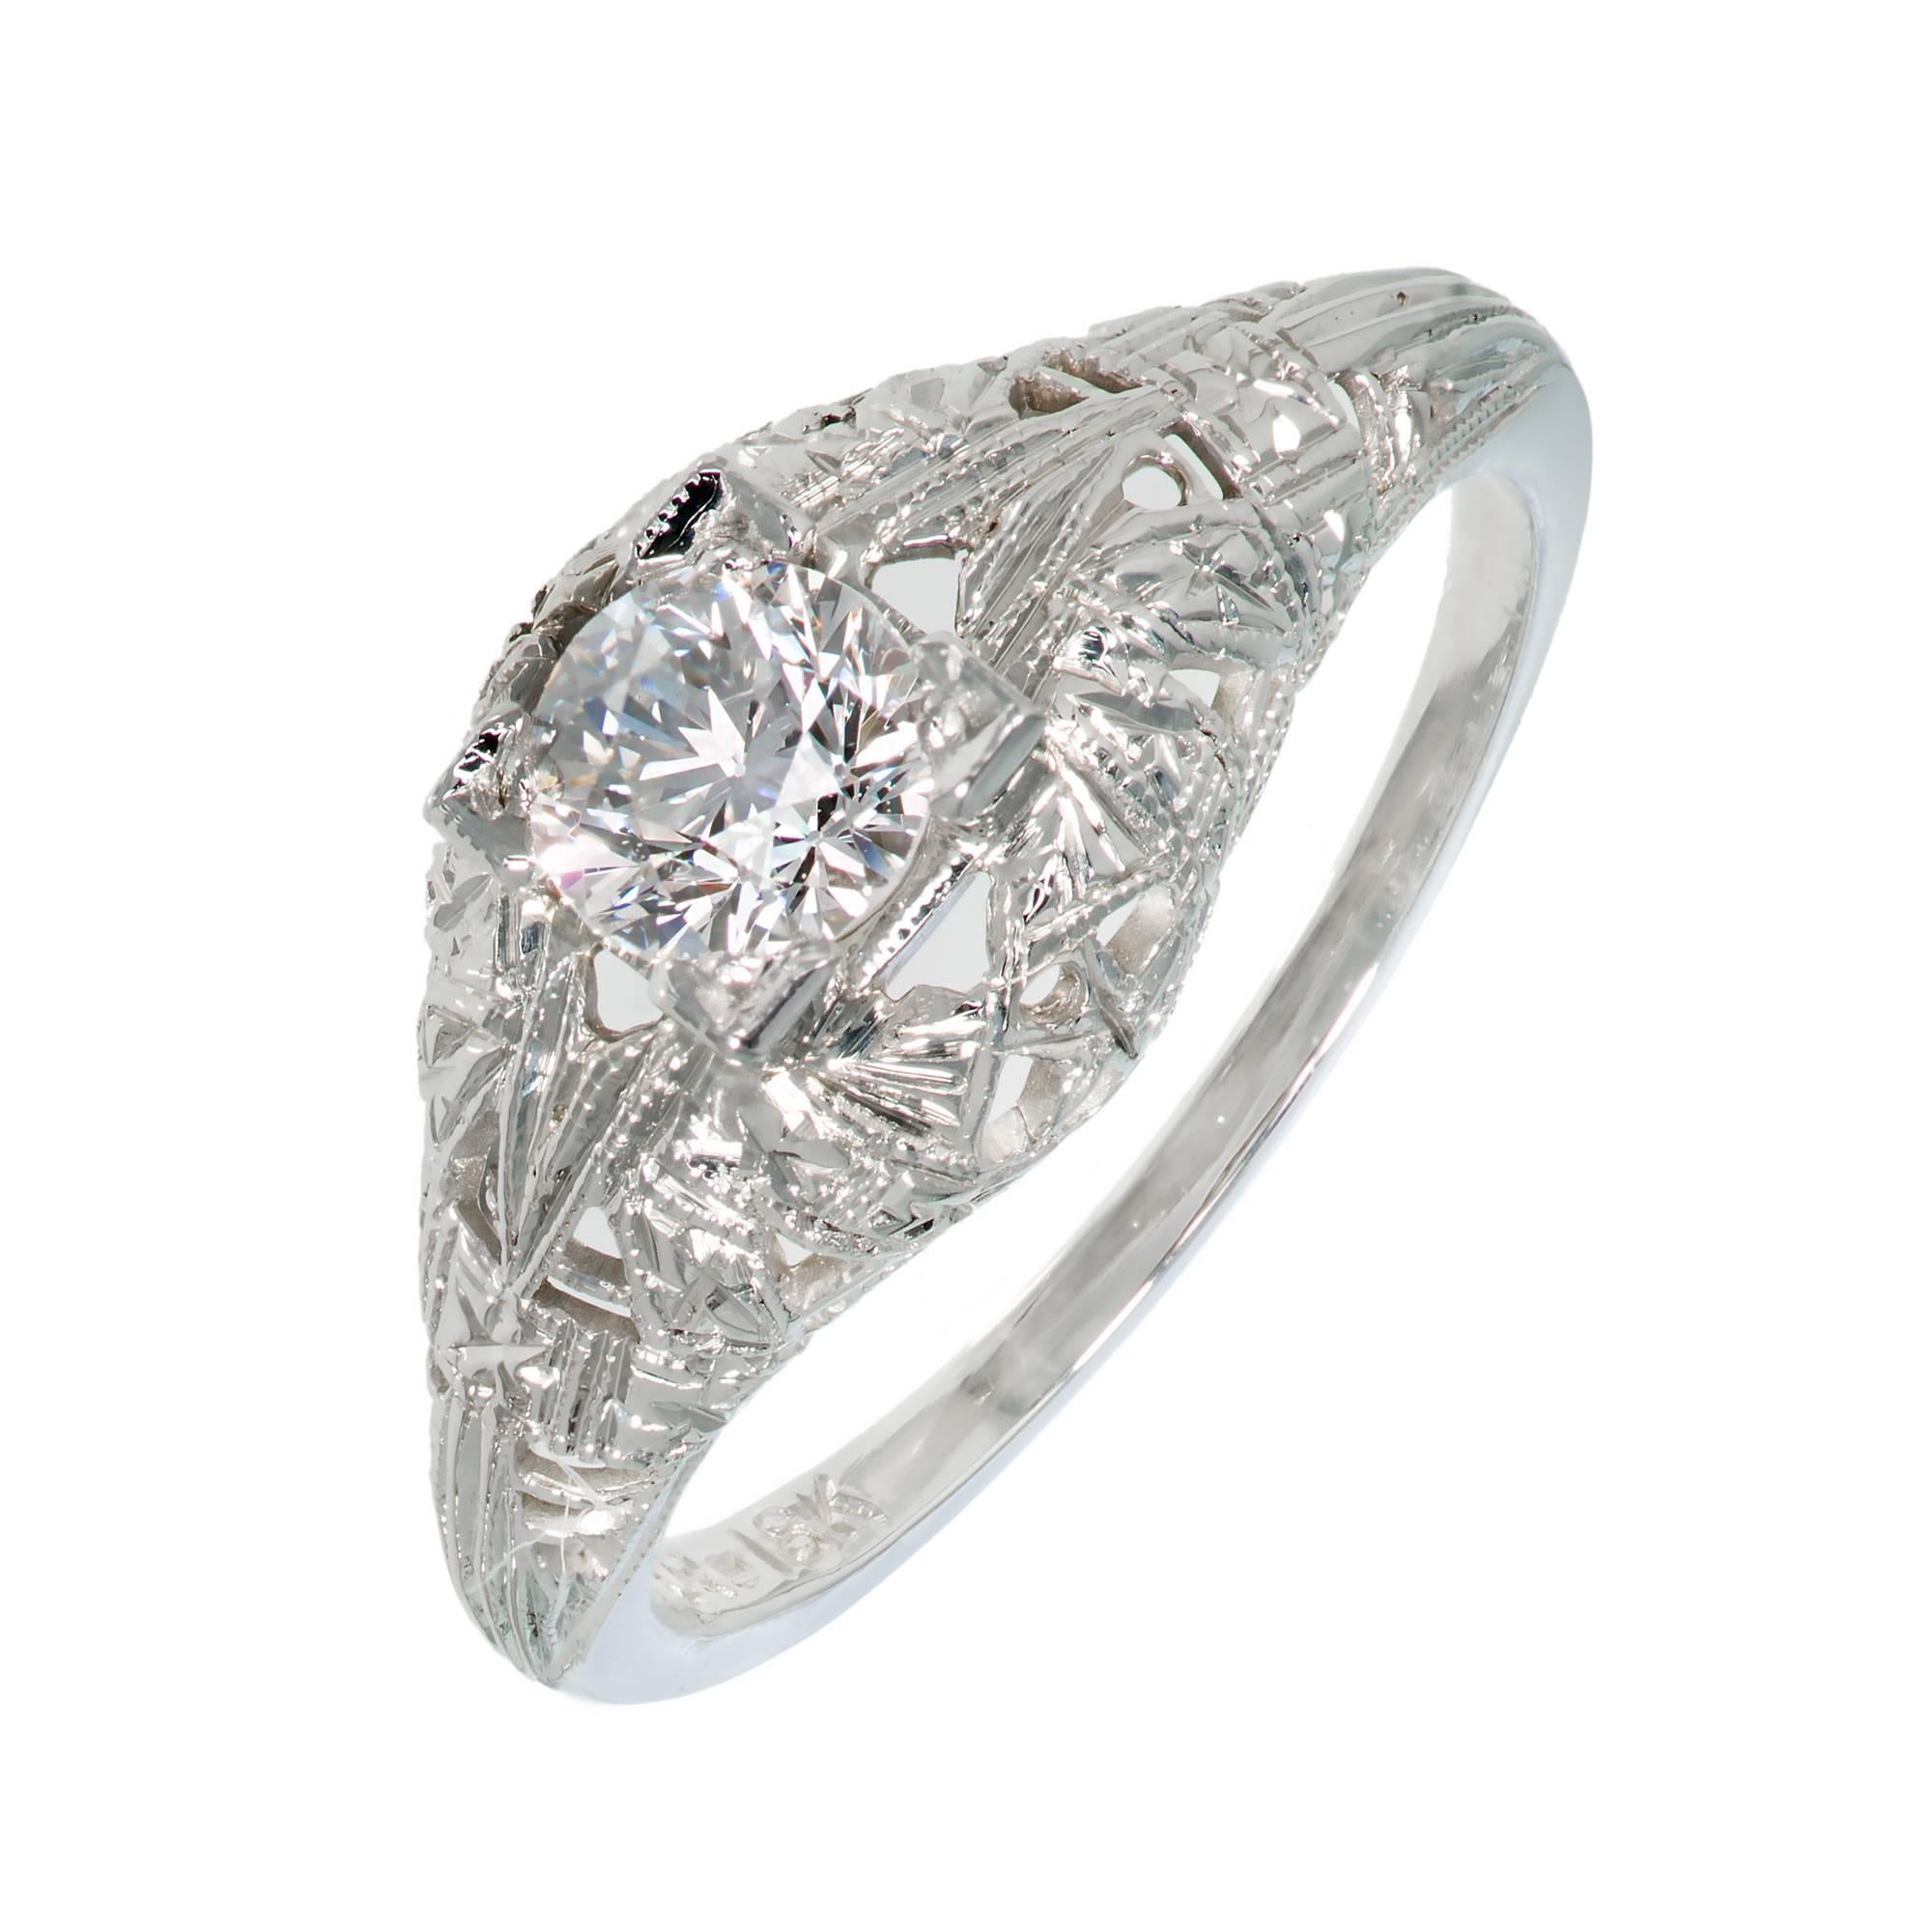 Art Deco 1920s diamond in a domed hand pierced 18k white gold engagement ring. crt

1 old European cut diamond, approx. total weight .45ct, E to F, VS2, 4.80 x 4.76 x 3.14mm.
Size 6 and sizable
18k White Gold
Tested and stamped: 18k
Hallmark: UR
2.6